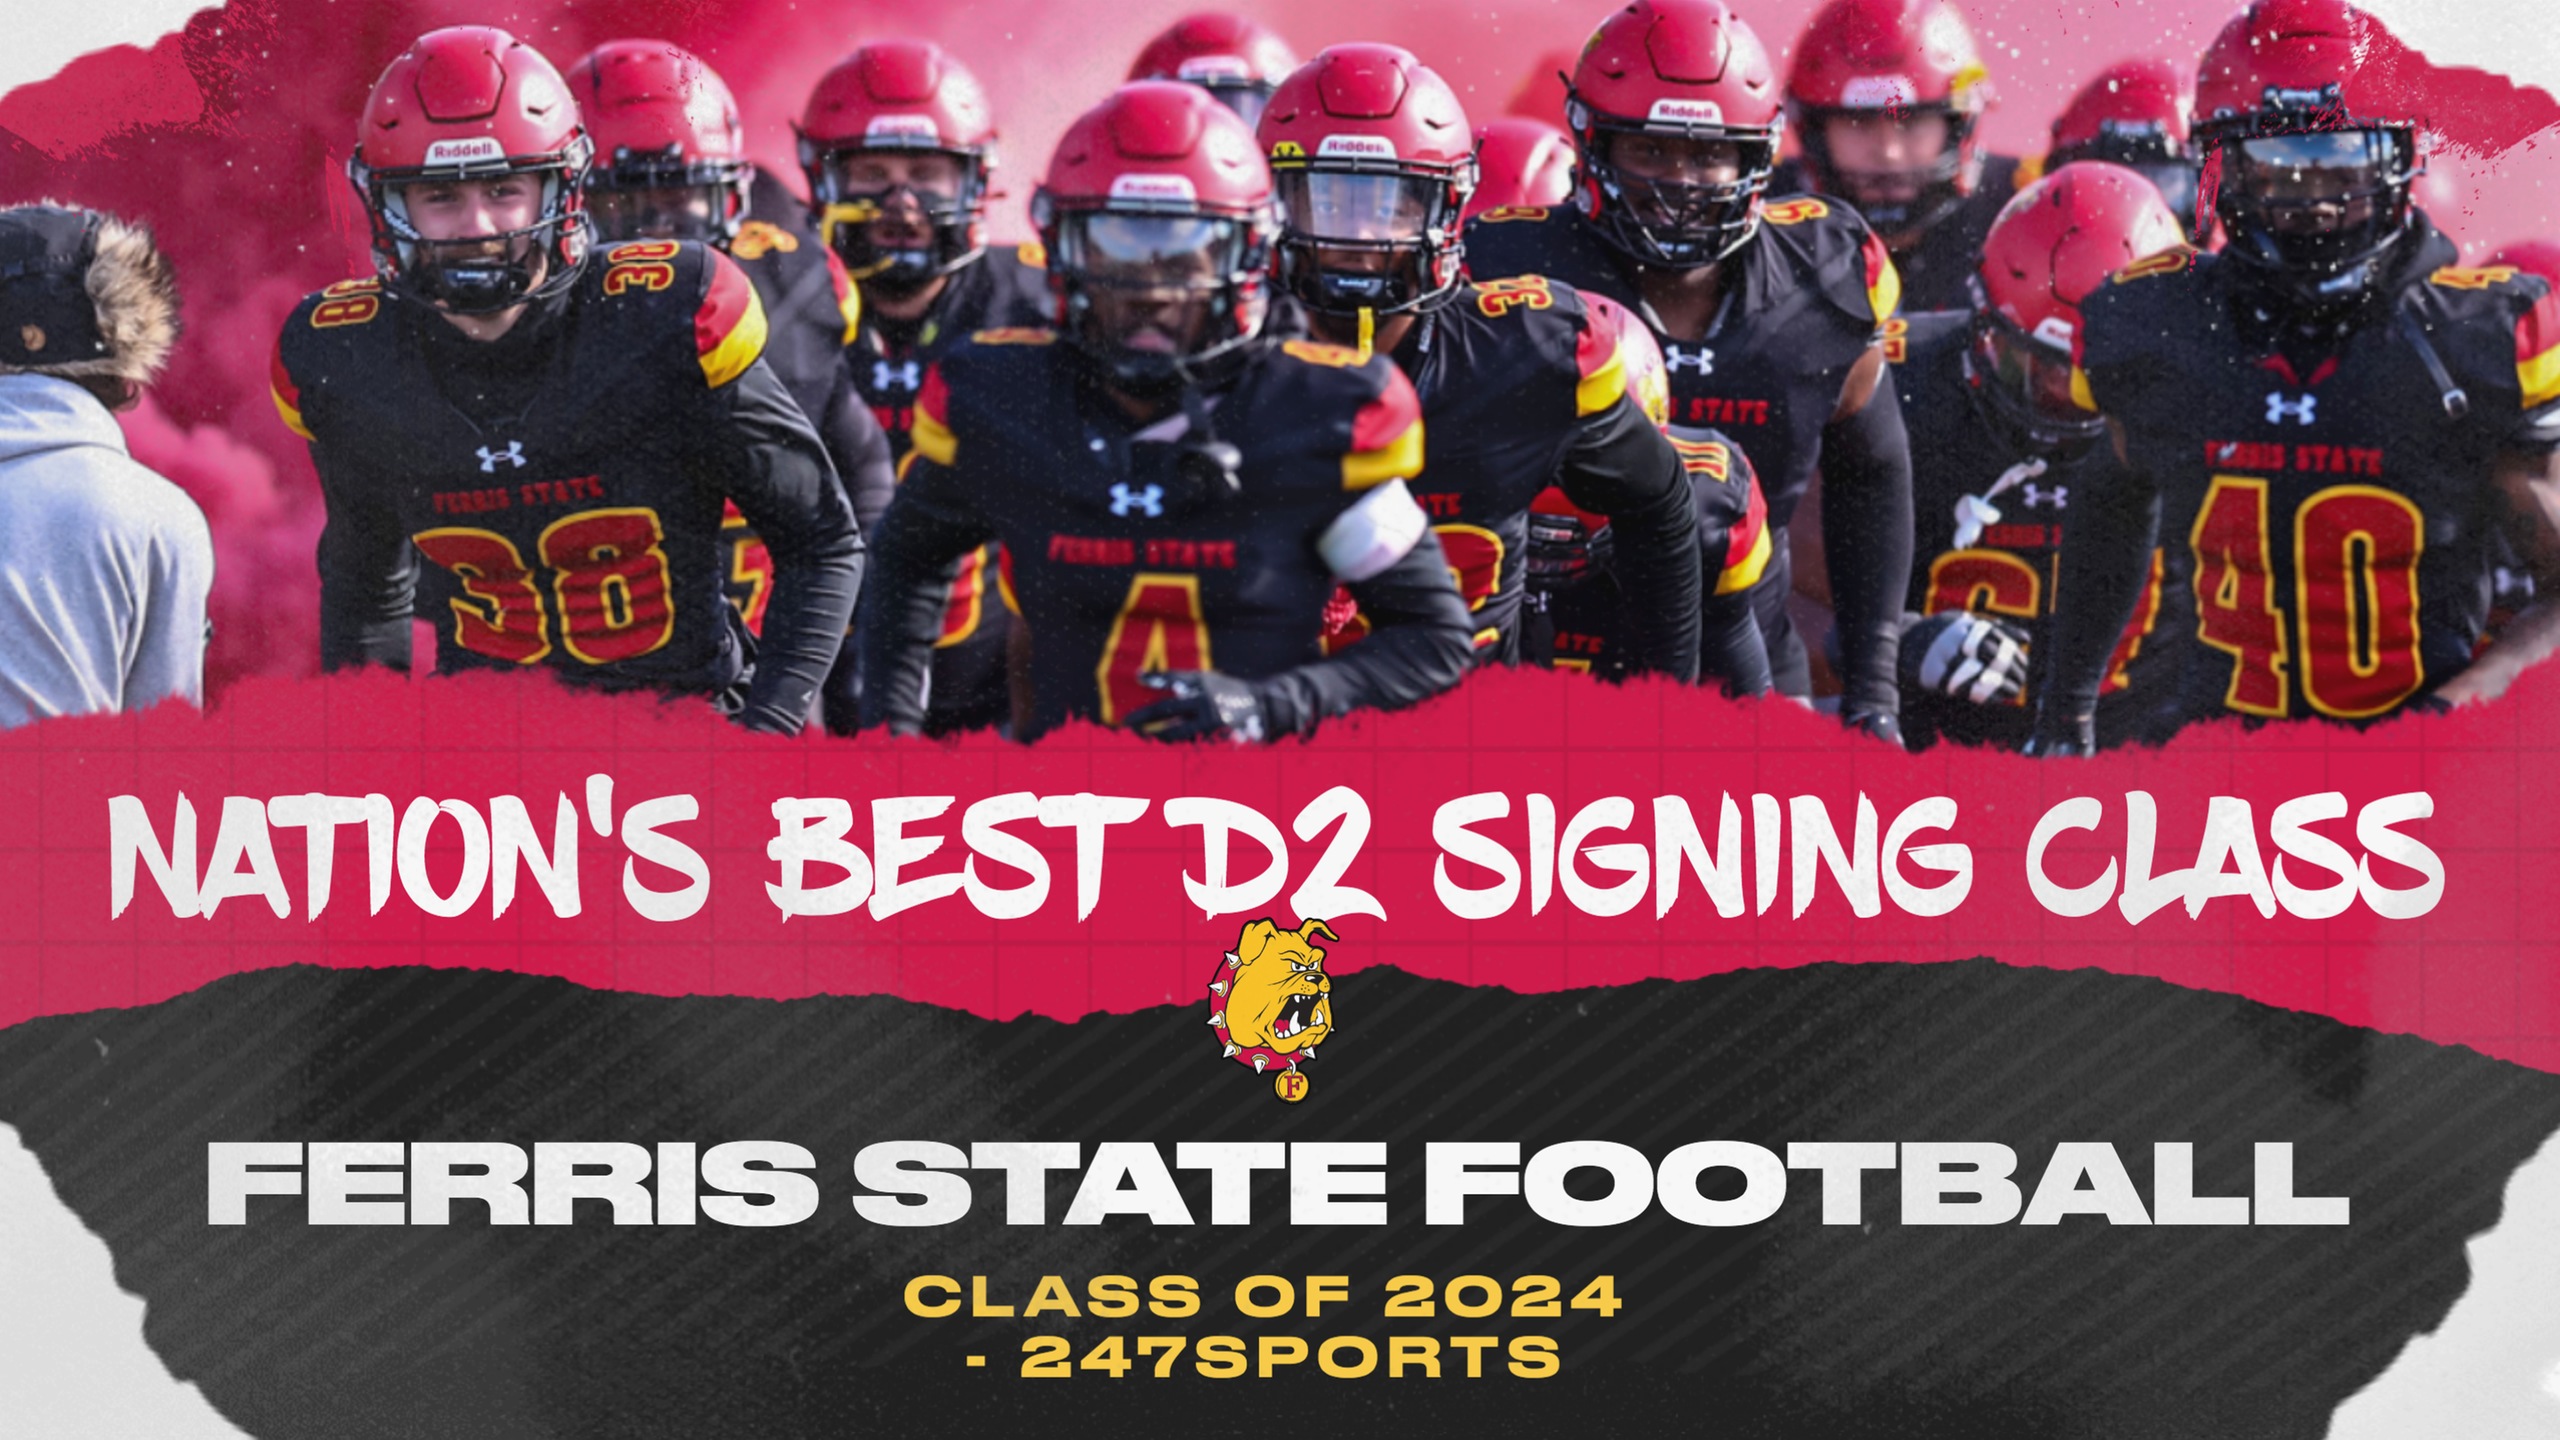 Ferris State Football Lands Nation's Top D2 Recruiting Class According To 247Sports